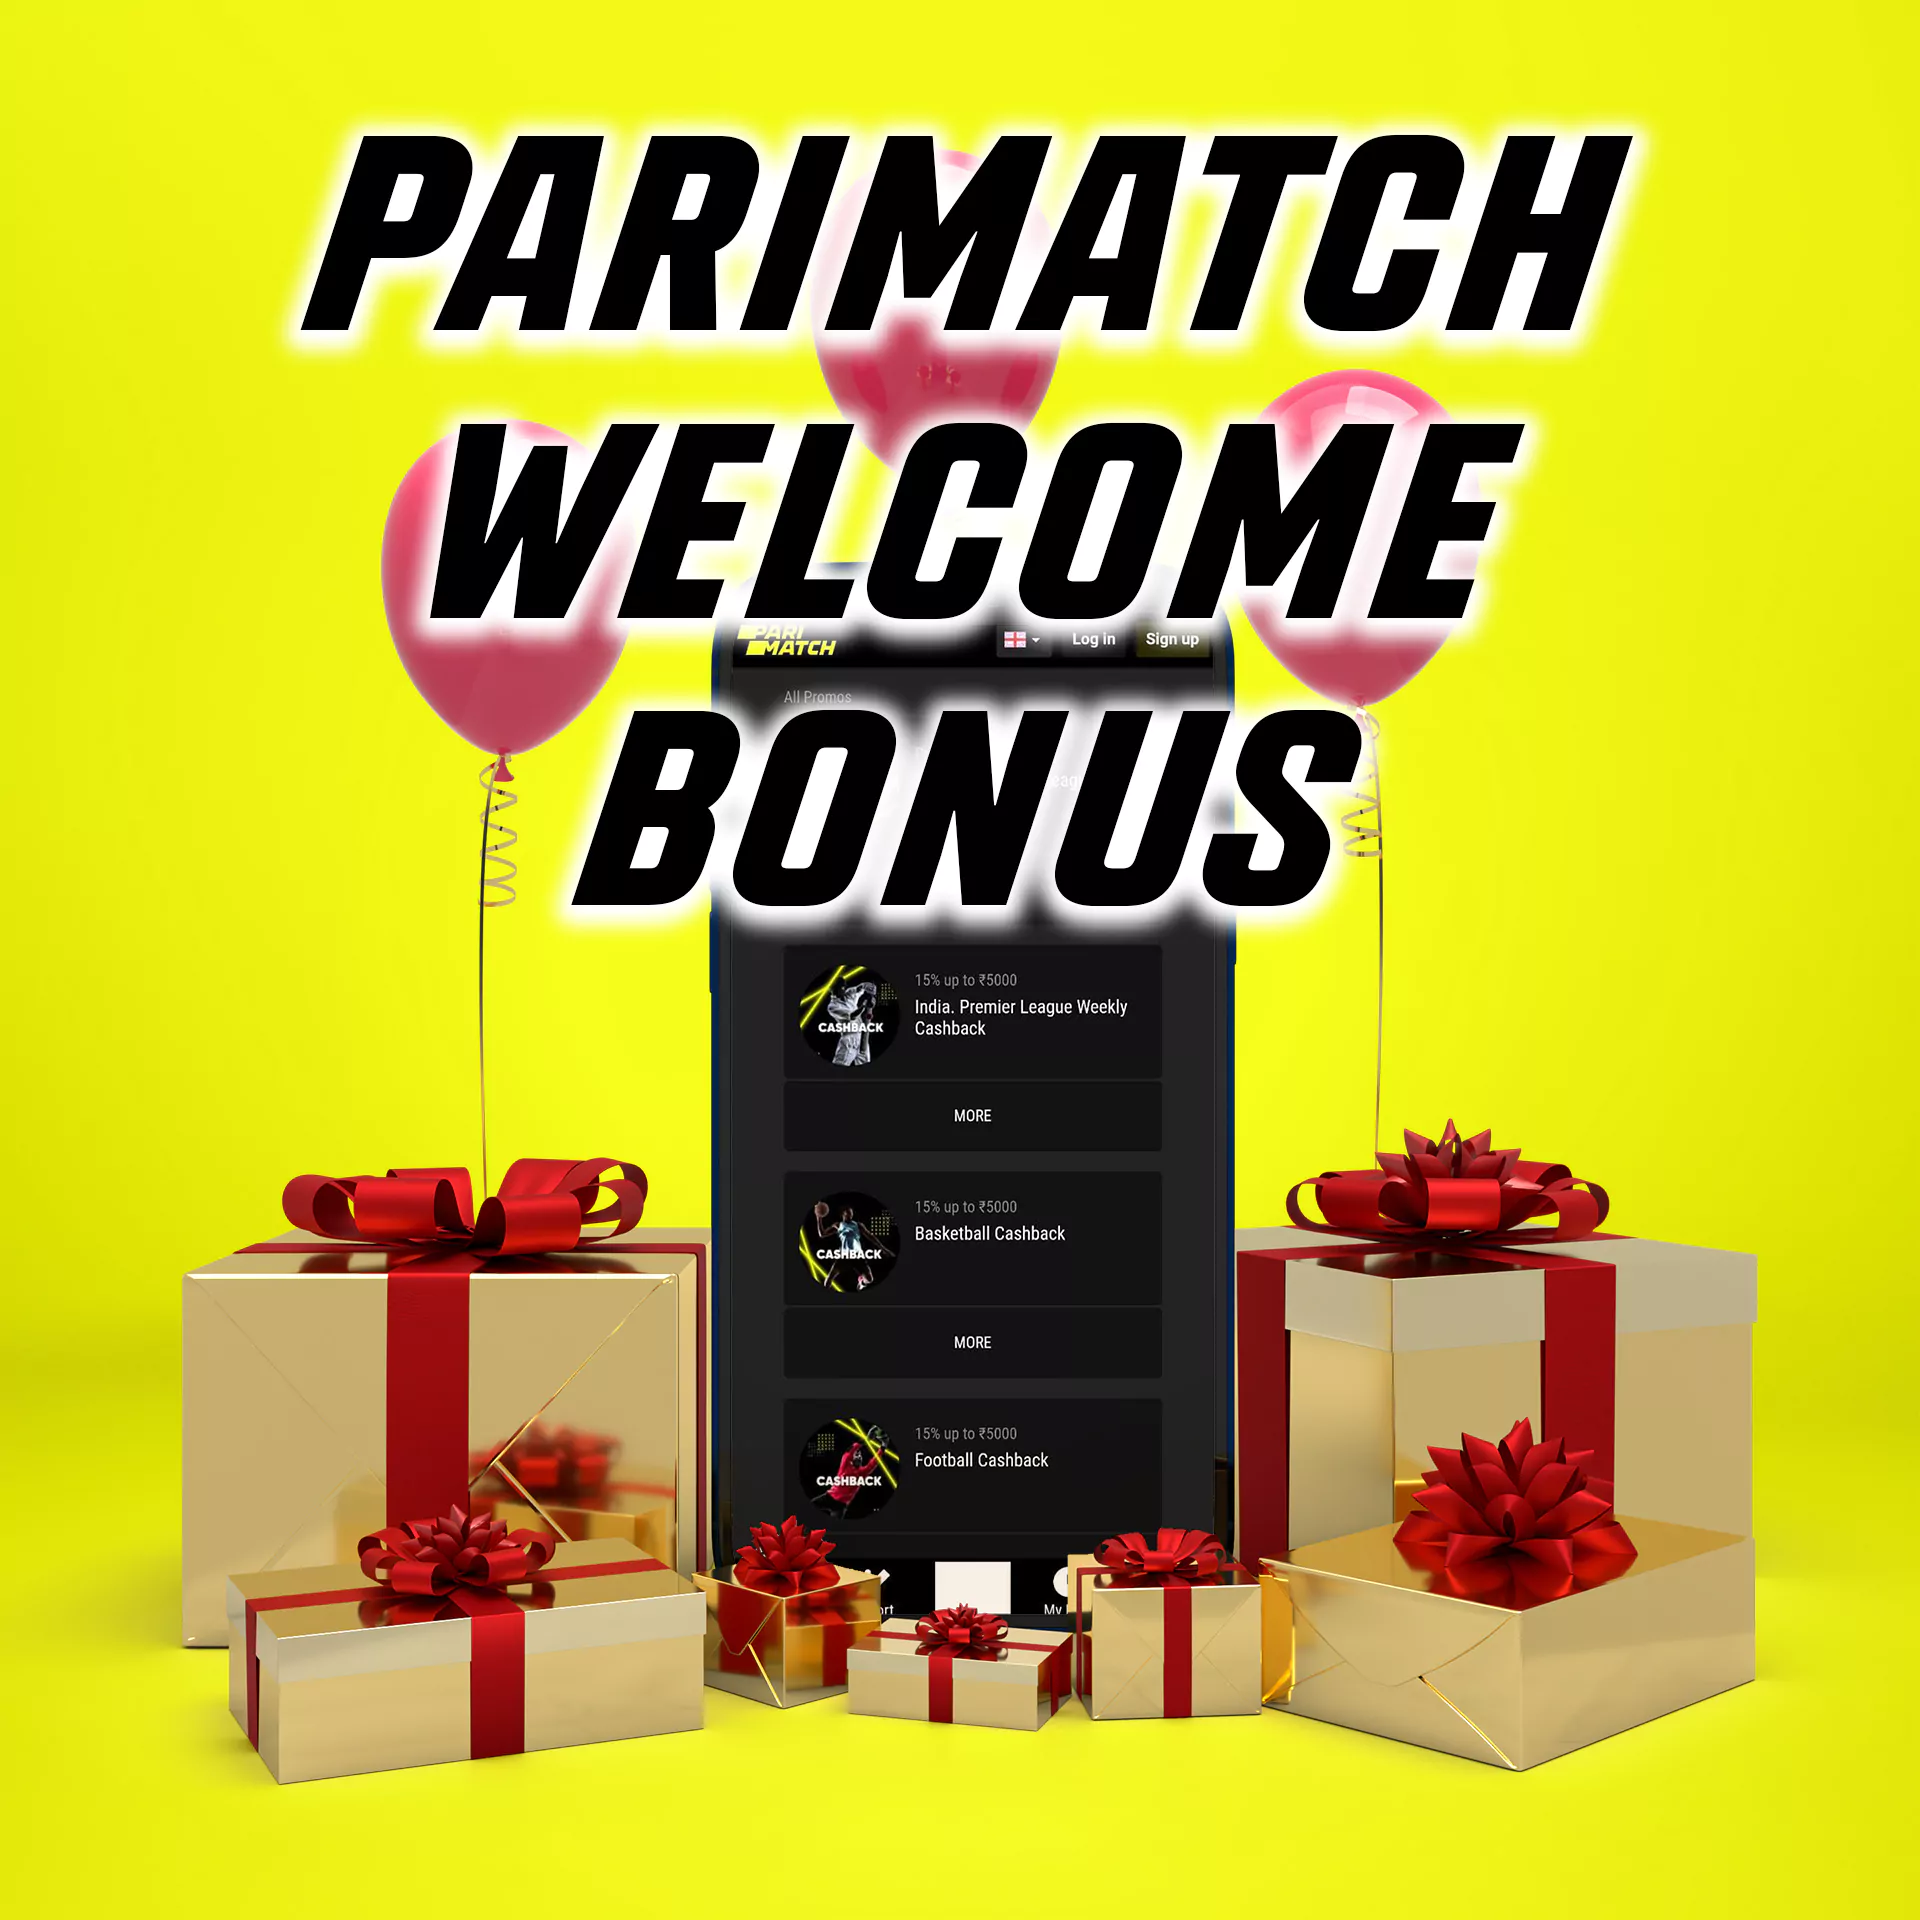 For new users, Parimatch App offers through the app welcome bonus and get up to +100% to your first deposit and 15,000 Indian rupees to your gaming account.